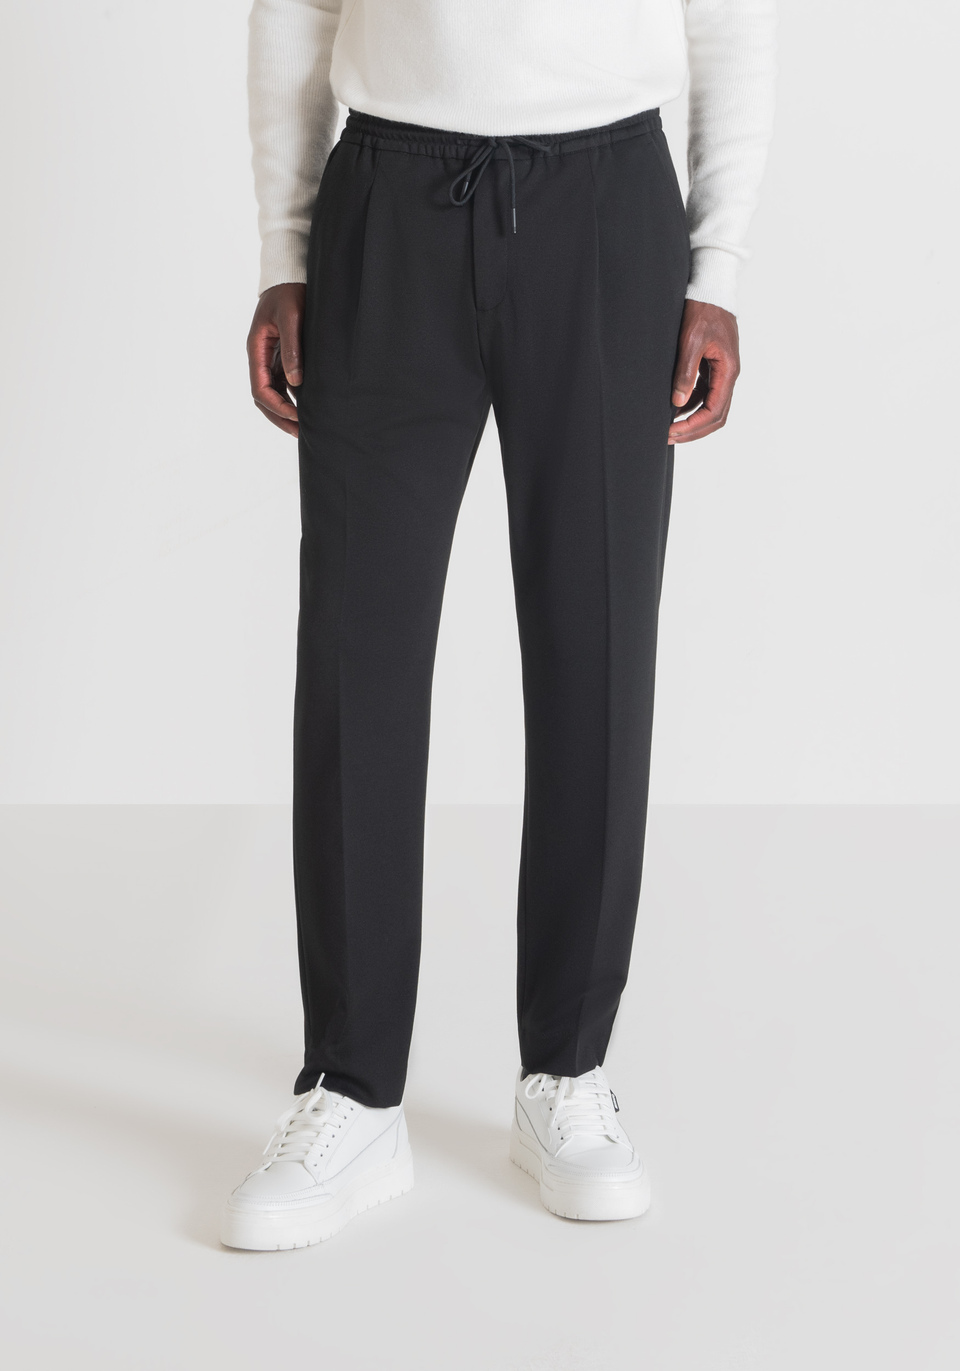 "NEIL" REGULAR-FIT TROUSERS WITH ELASTIC AND DRAWSTRING - Antony Morato Online Shop